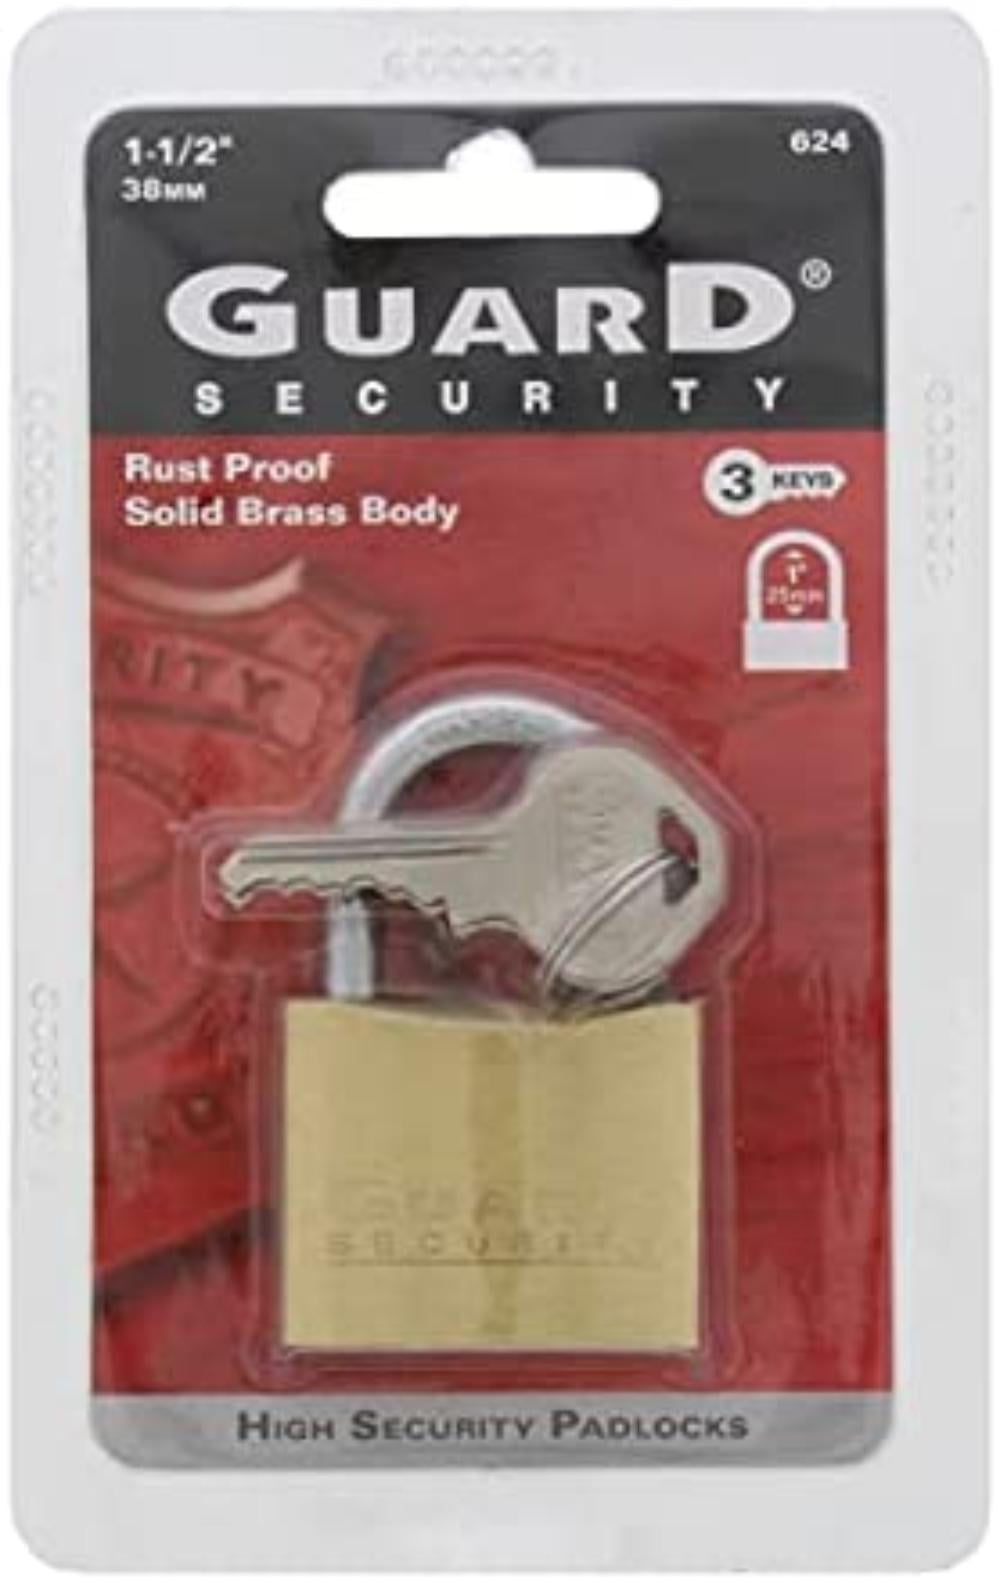 Guard Security 624 Solid Brass Padlock with 1-1/2" Standard Shackle 